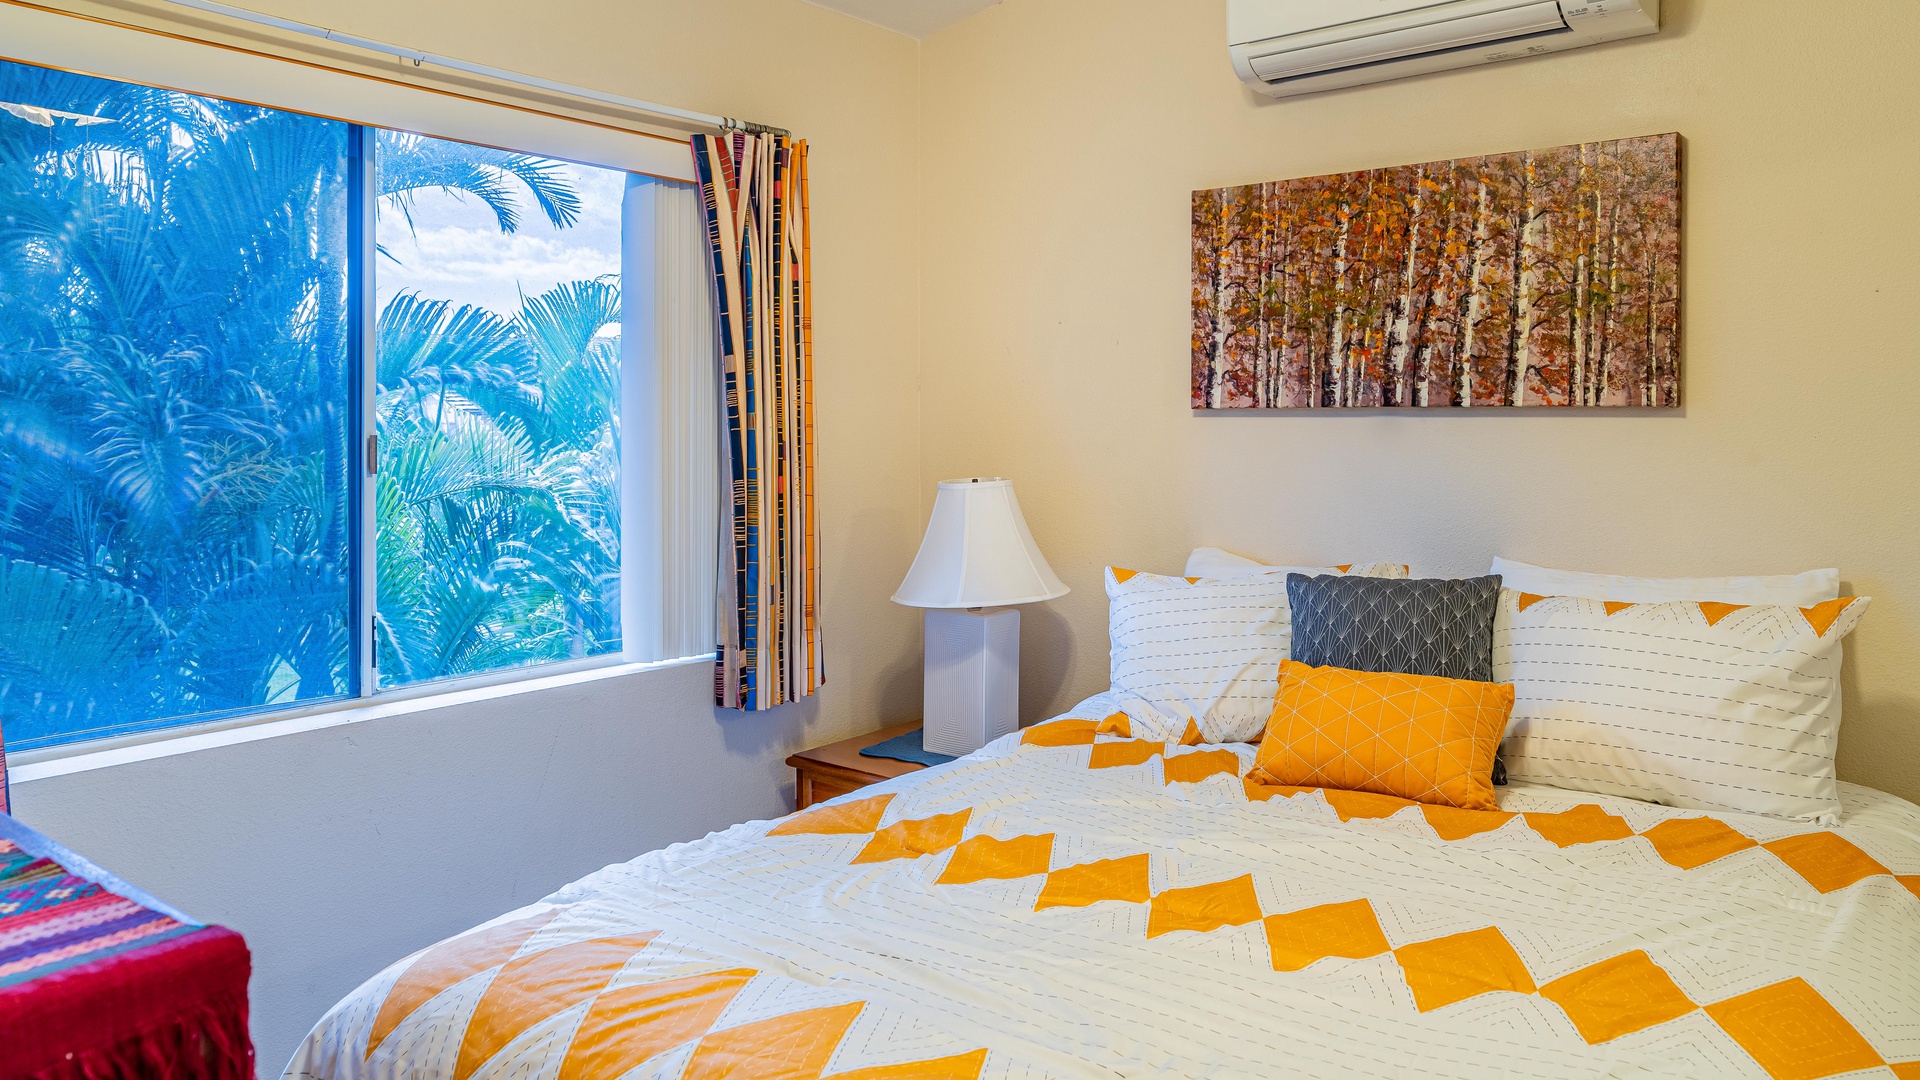 Kapolei Vacation Rentals, Fairways at Ko Olina 33F - The third guest bedroom offers a view and bright patterns.